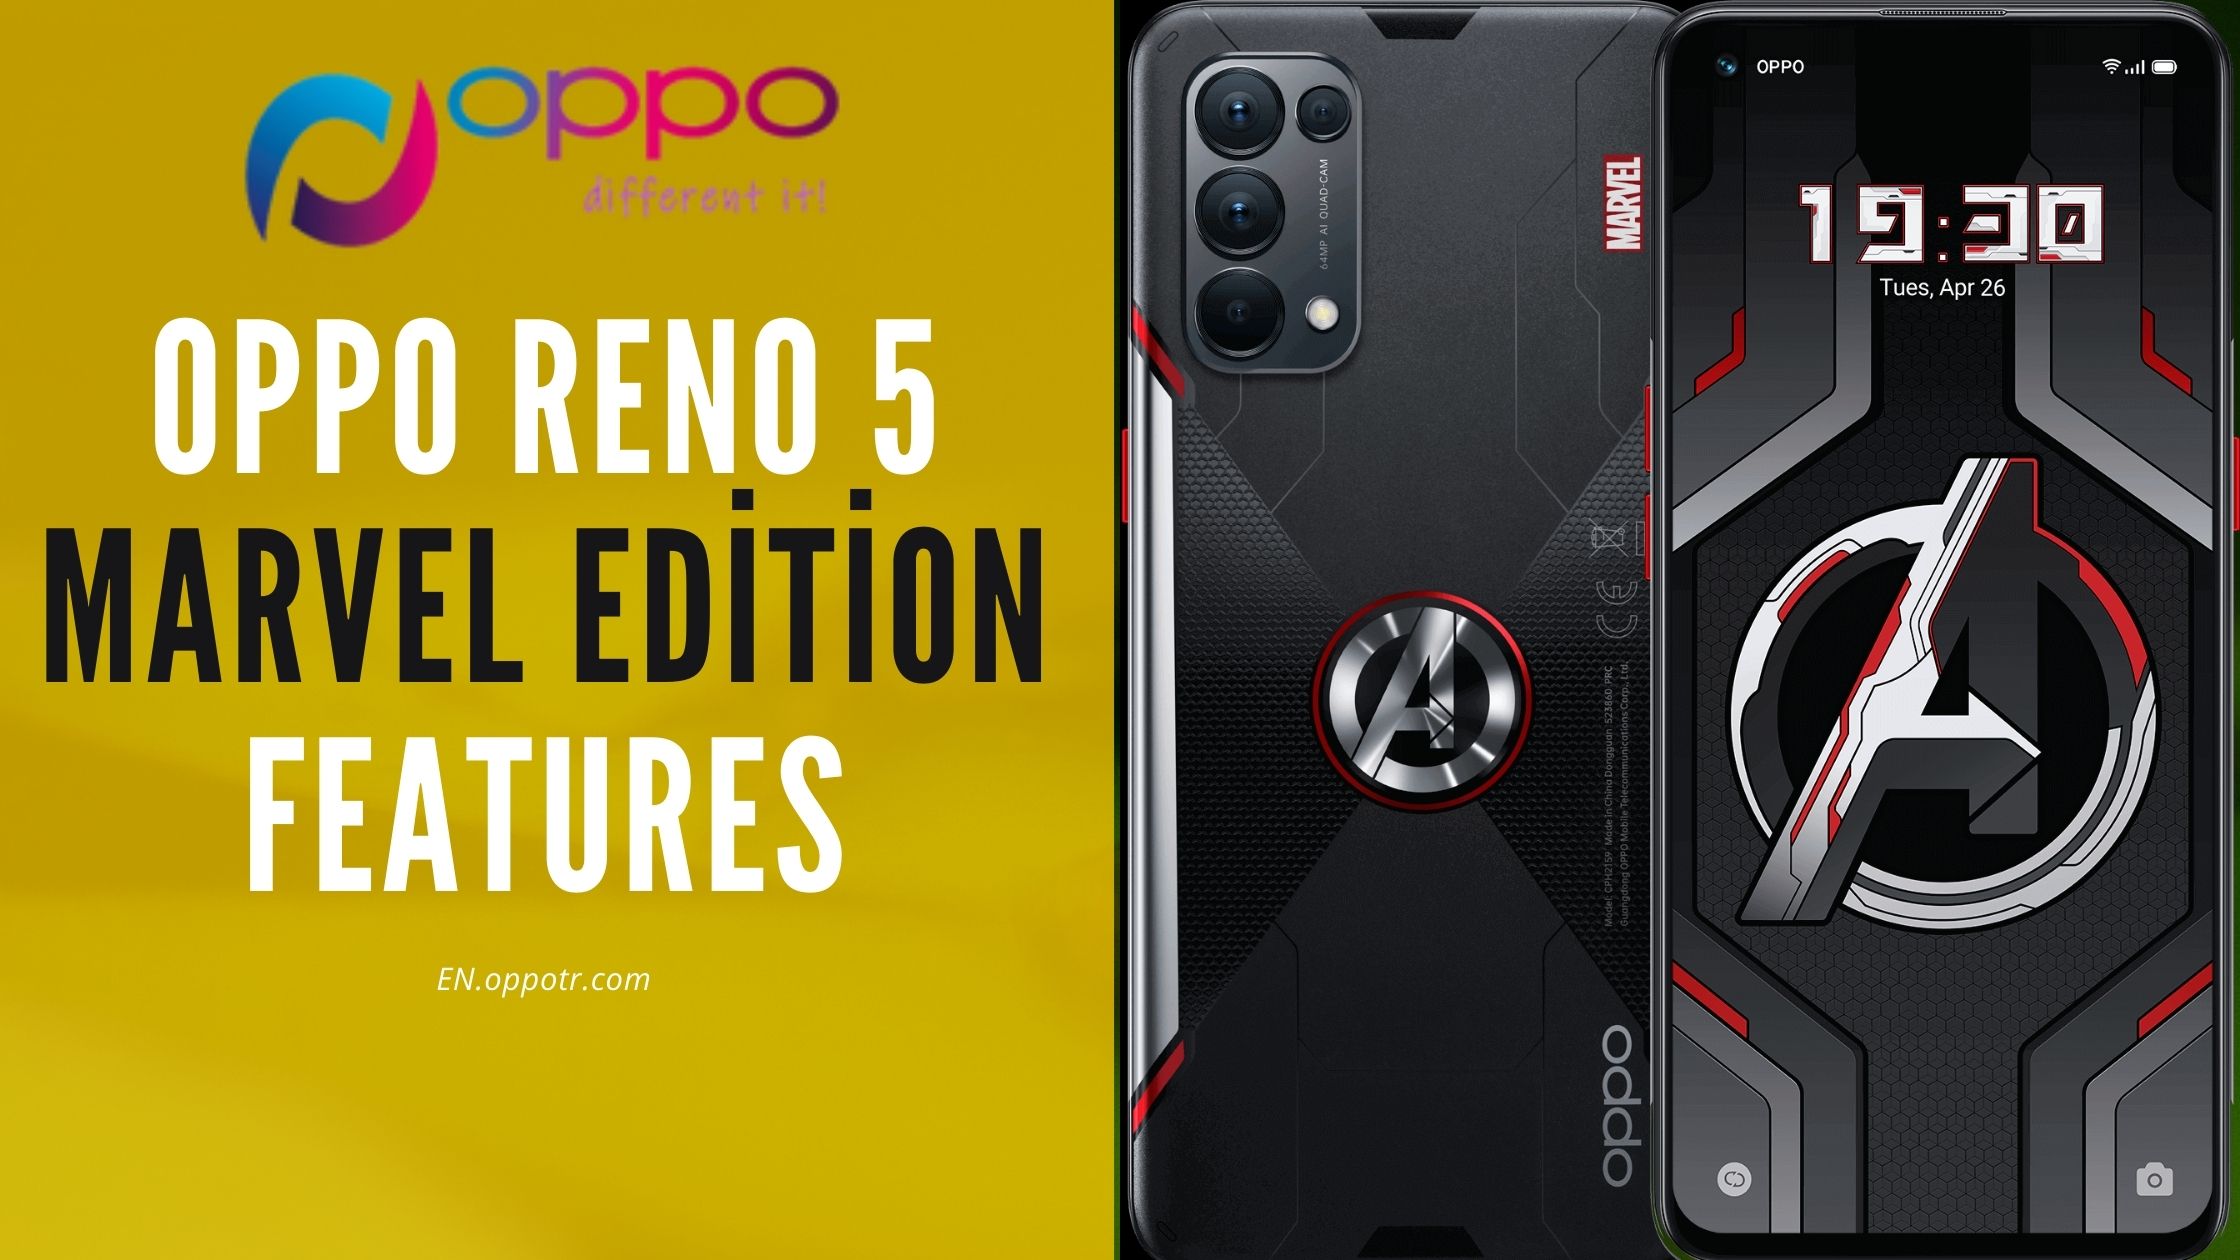 OPPO Reno 5 Marvel Edition Features